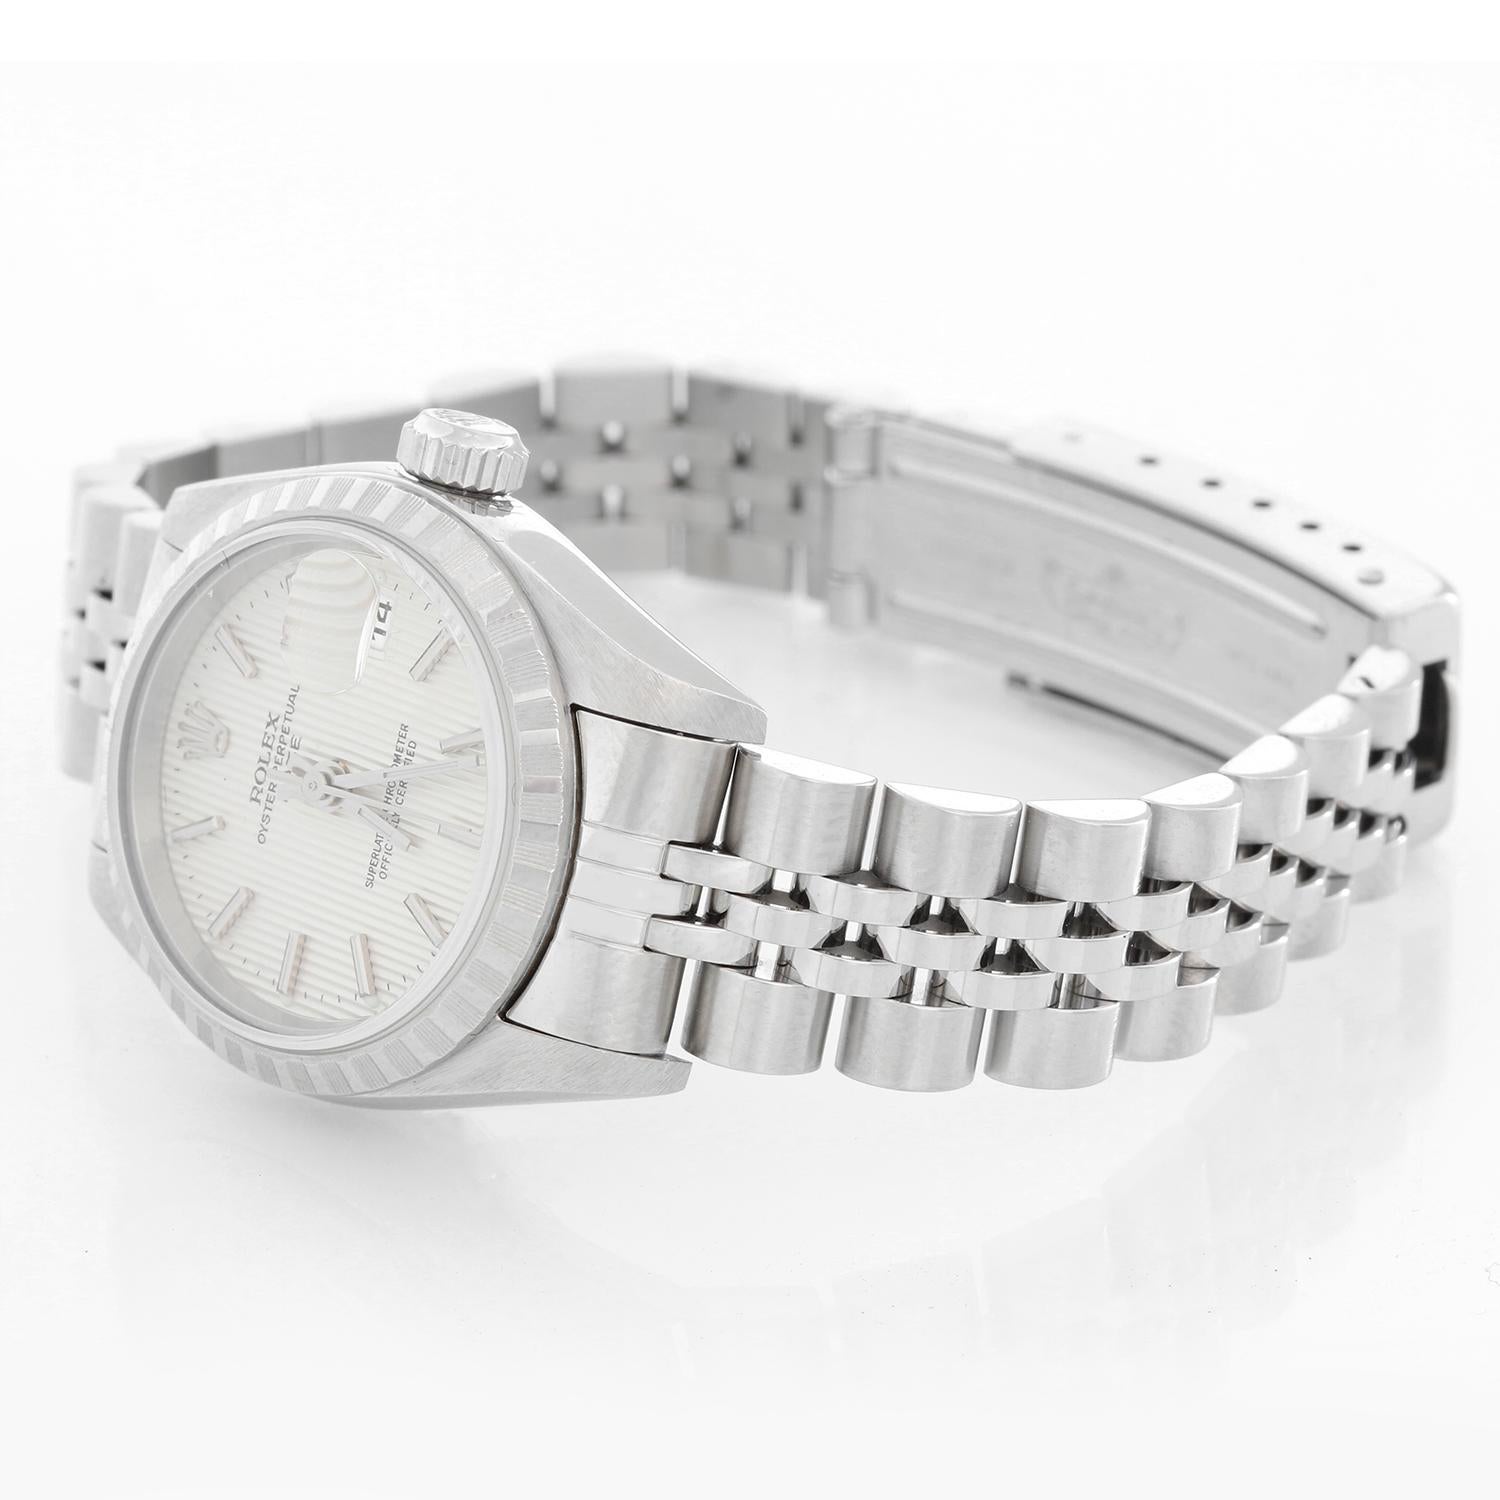 Rolex Ladies Date Stainless Steel Watch 79240 - Automatic winding, 31 jewels, Quickset, sapphire crystal. Stainless steel case with white gold fluted bezel 26mm diameter. Silver Tapestry dial with stick markers. Stainless steel Jubilee bracelet.